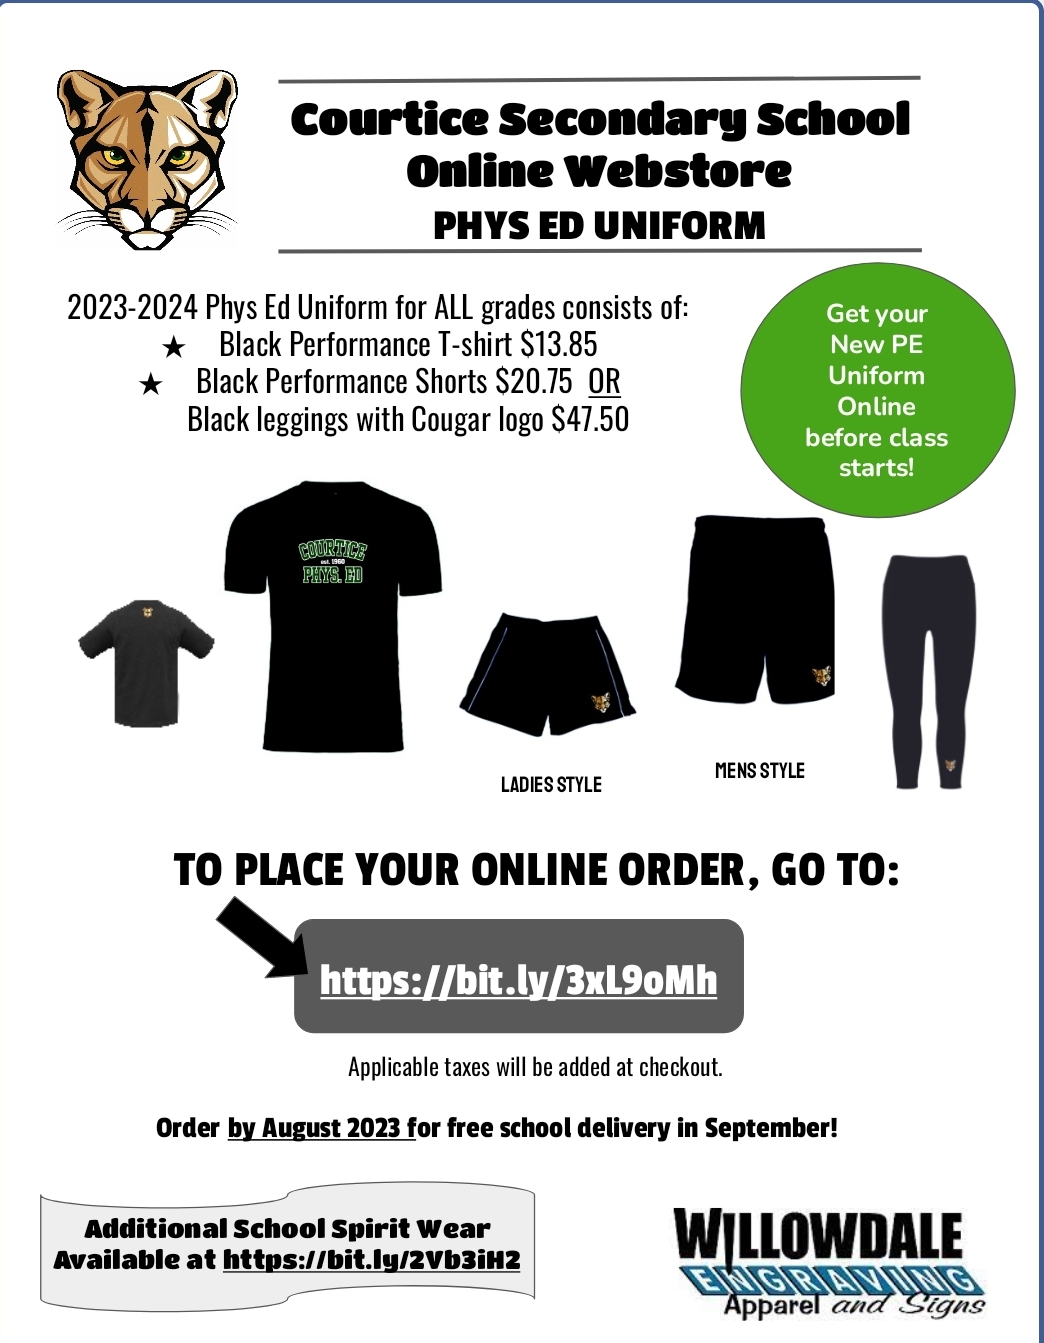 Physical Education Uniform 2023-2024 available now